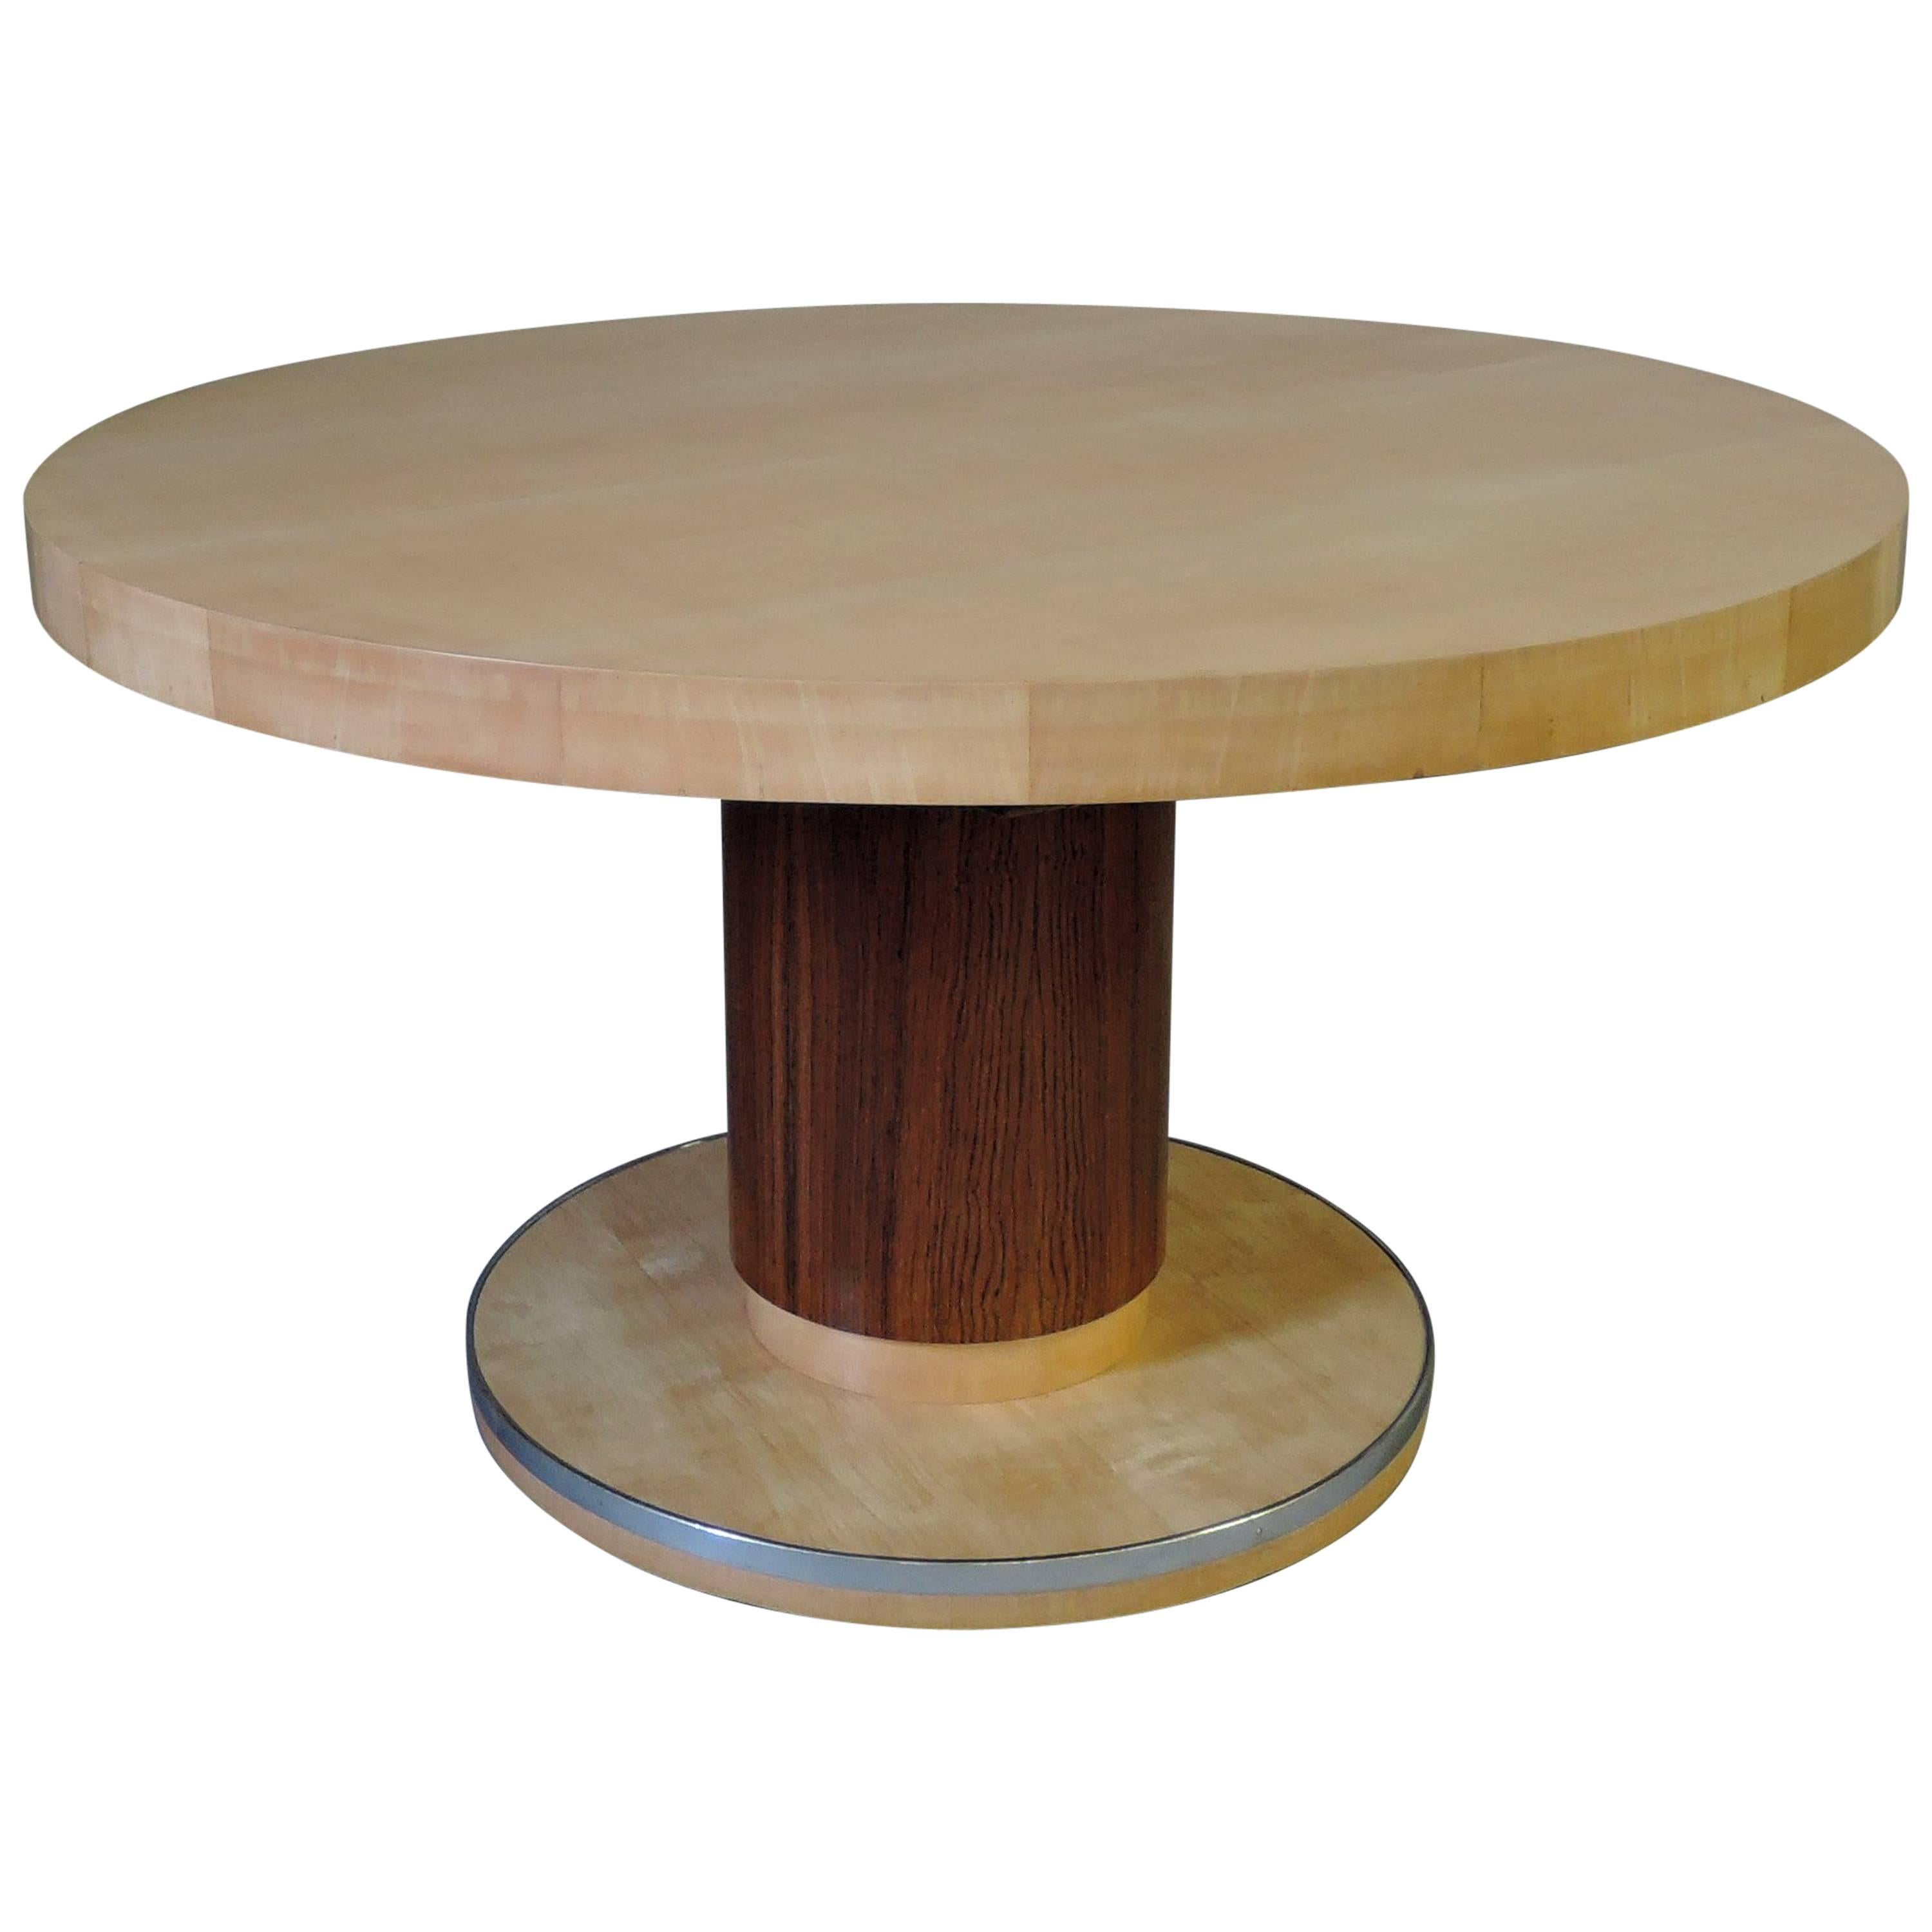 A Fine Round Art Deco Extendable Dining Table by De Coene 